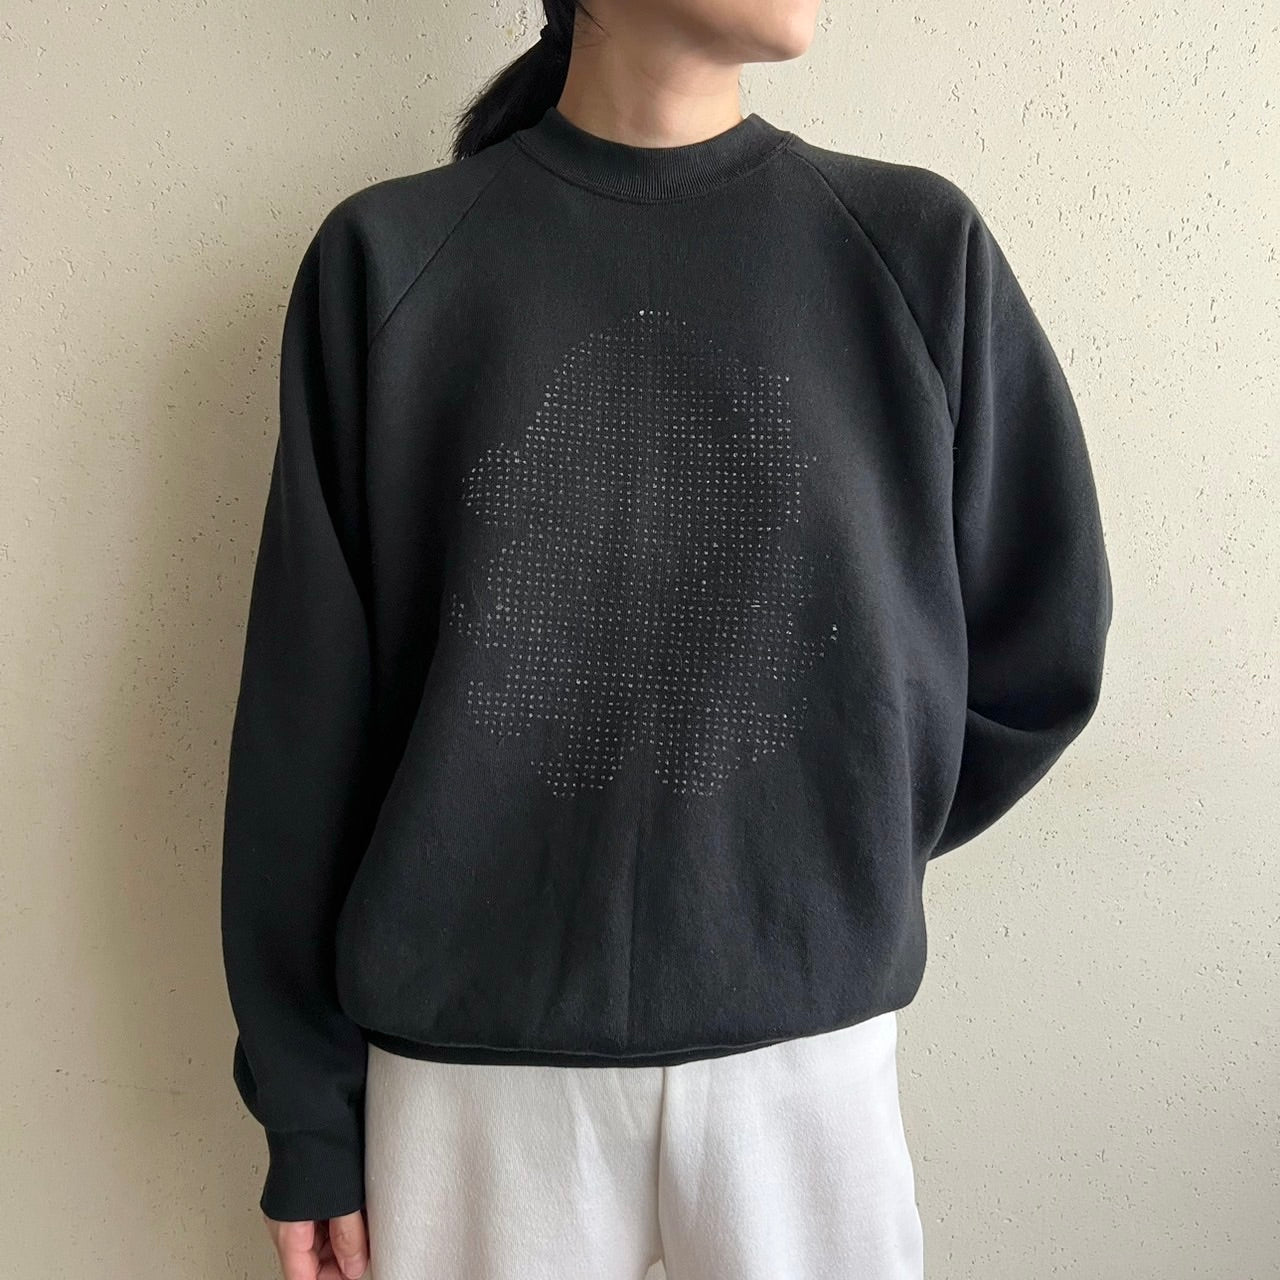 90s Hand Printed Sweater Made in USA